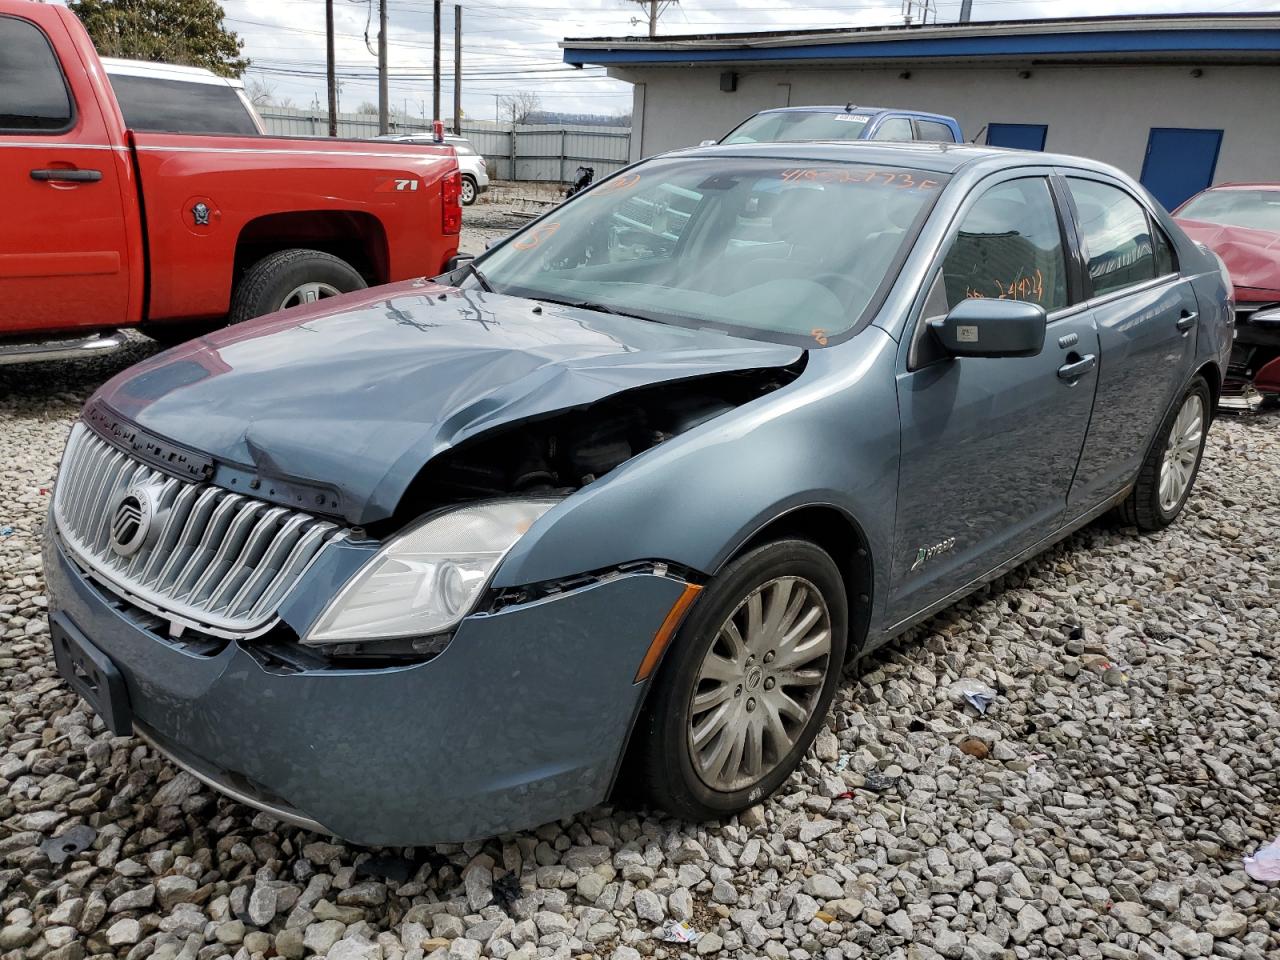 2011 Mercury Milan Hybrid for sale at Copart Louisville, KY Lot #41852*** |  SalvageReseller.com